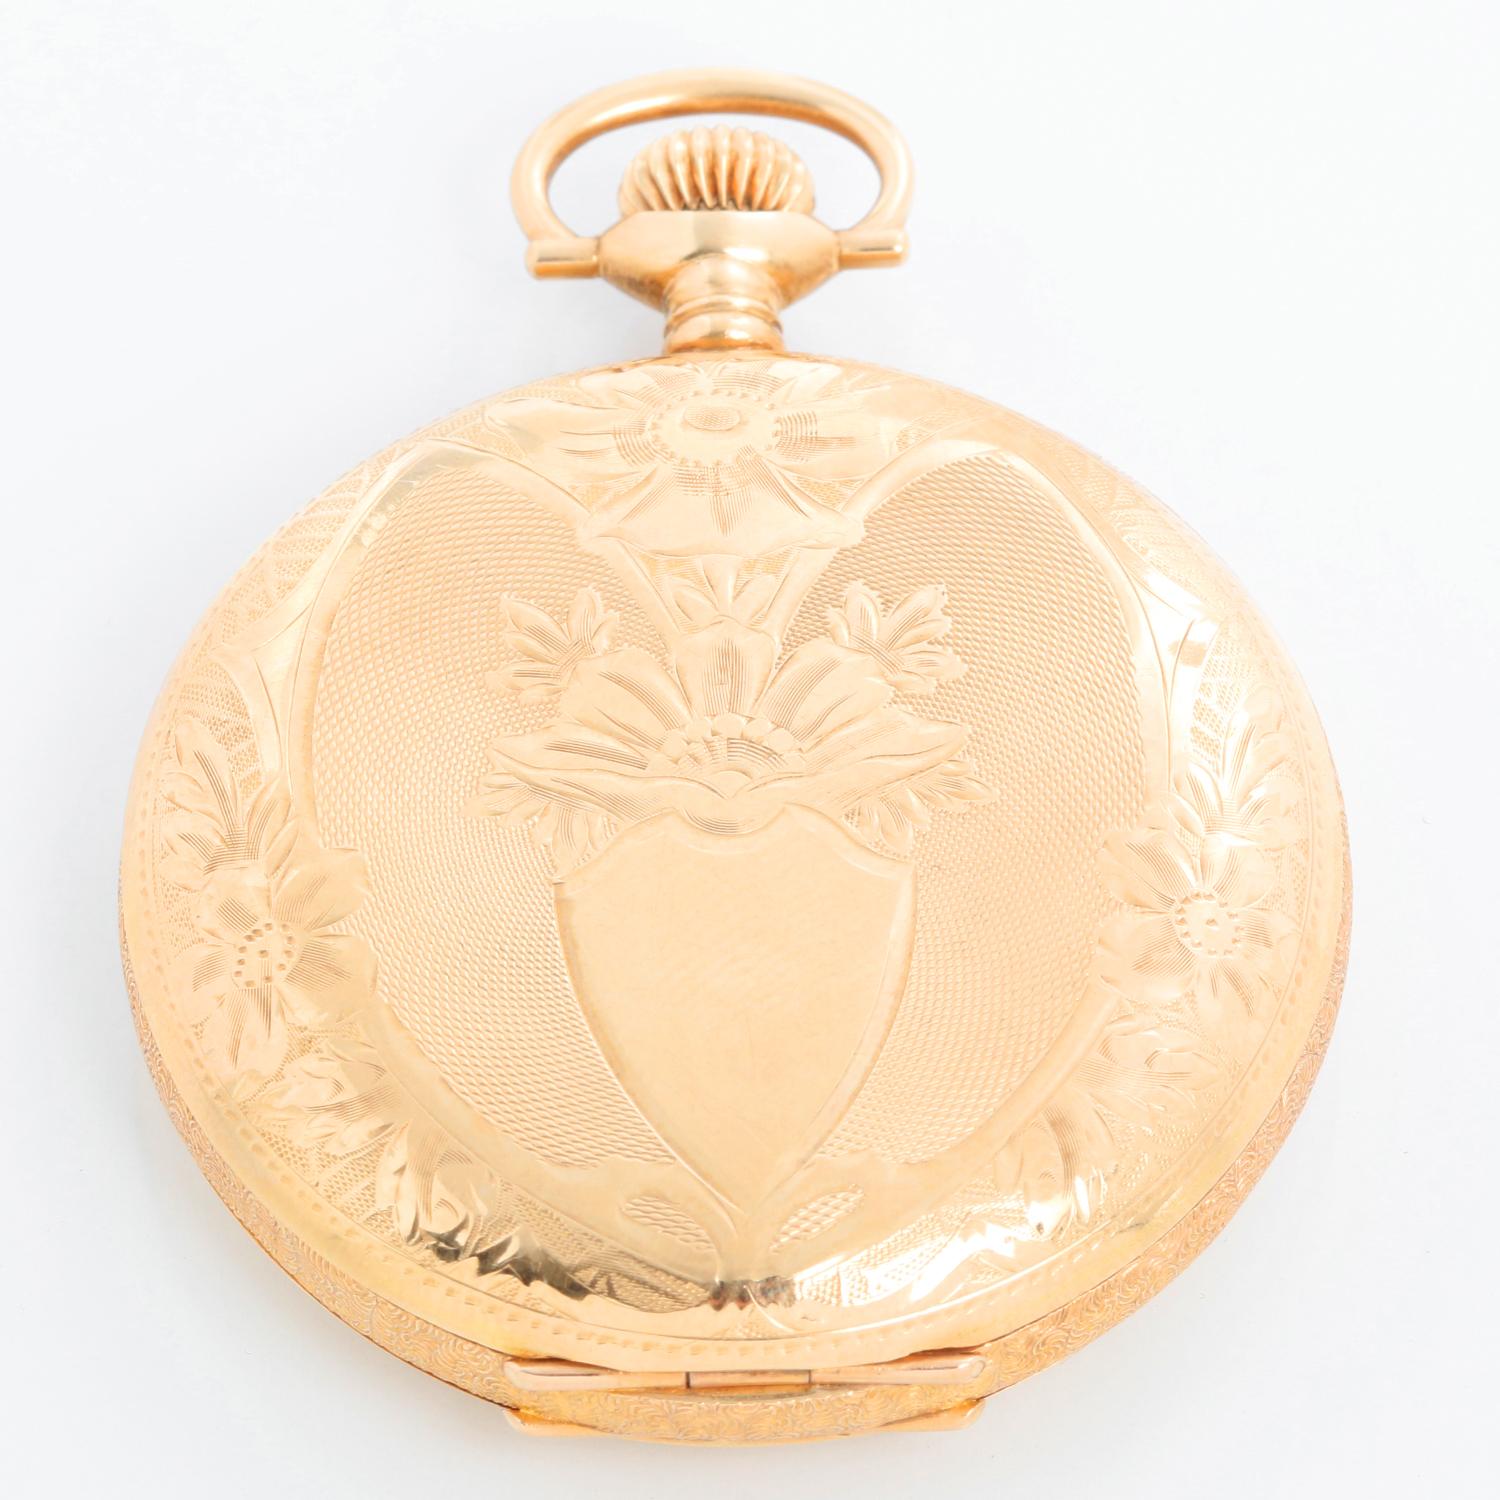 Elgin 14K Yellow Gold Pocket Watch - Manual winding. 14K Yellow gold with ornate case  ( 49 mm ). White dial with Arabic numerals. Pre-owned with custom box. 